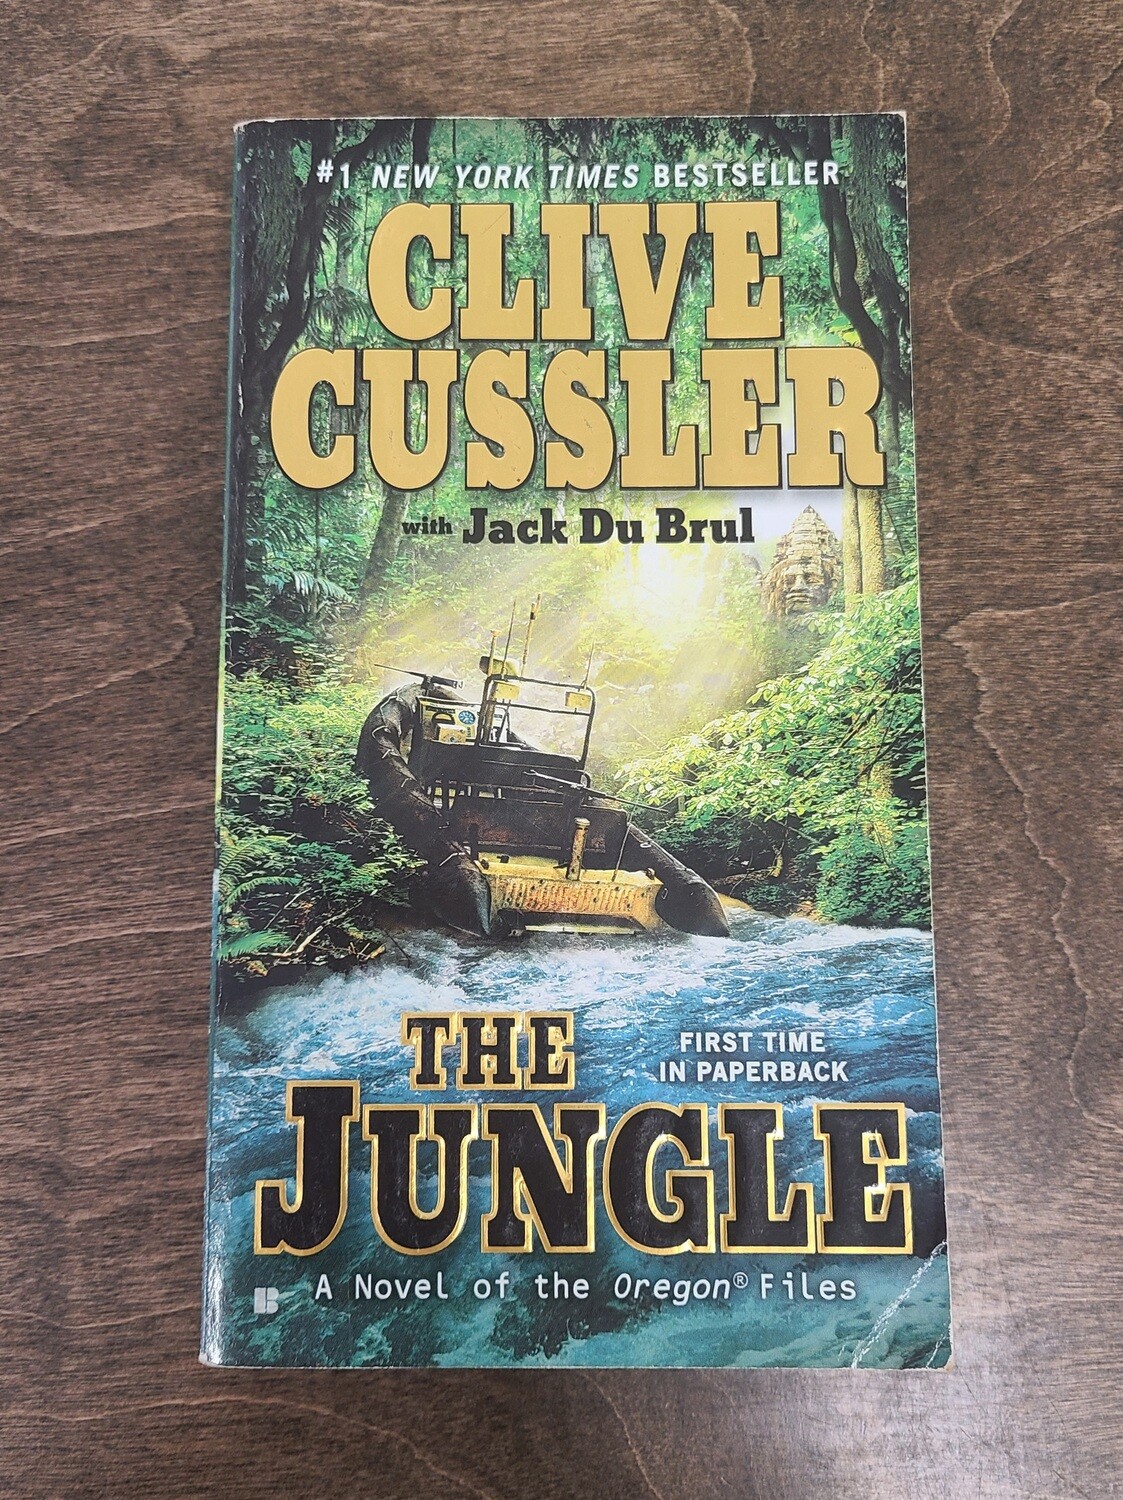 The Jungle by Clive Cussler with Jack Du Brul